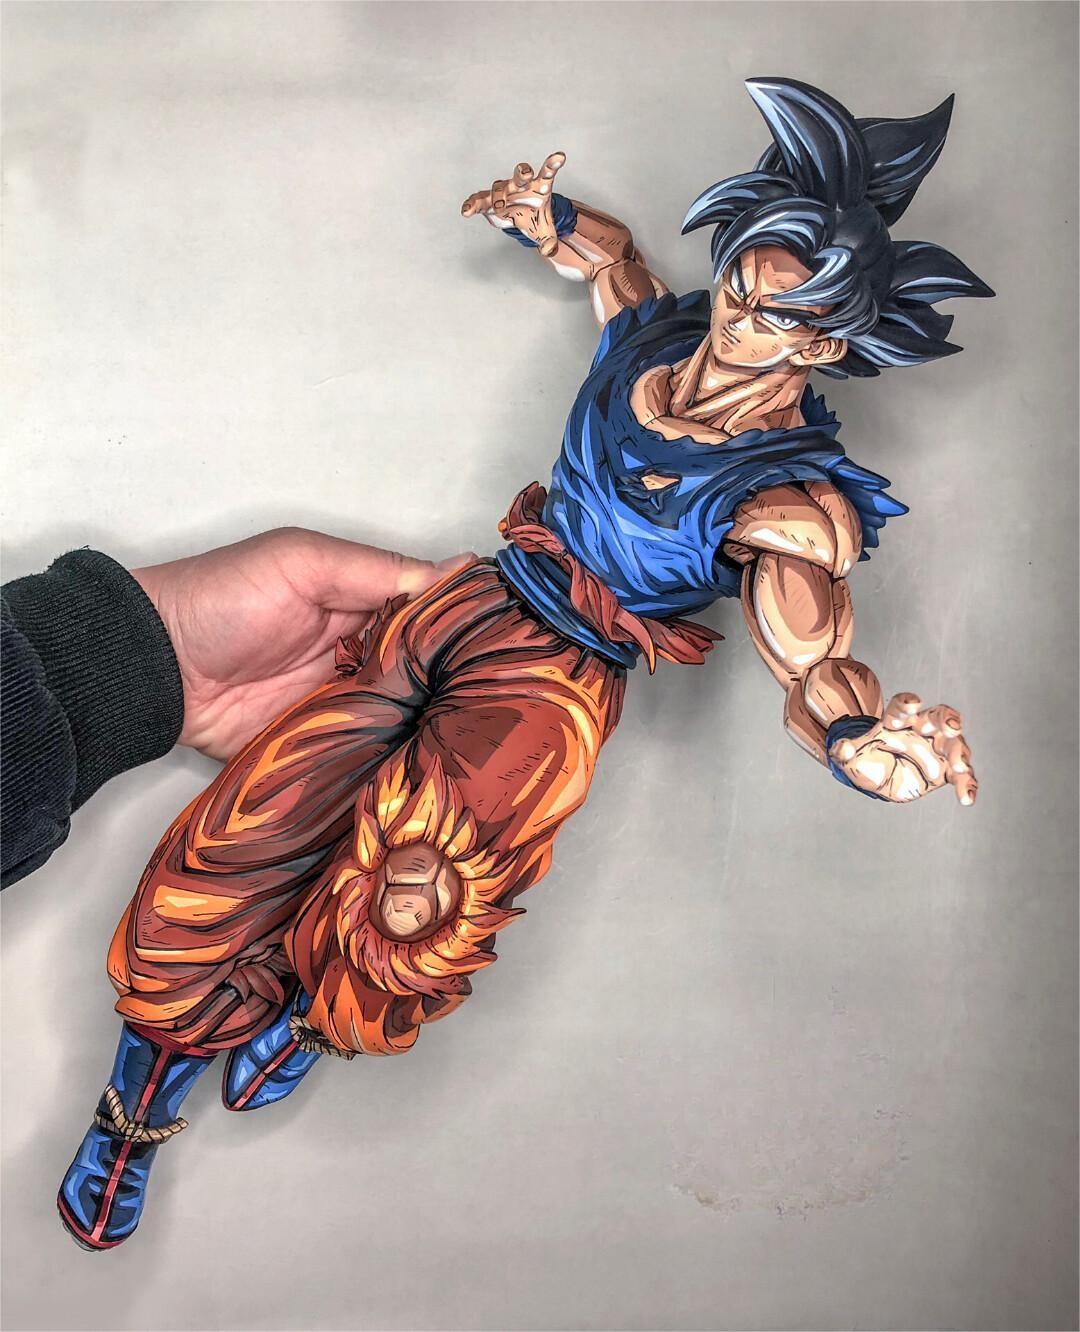 Repaint Dragon Ball Freedom Goku with Photo Frame Background - Lyk Repaint